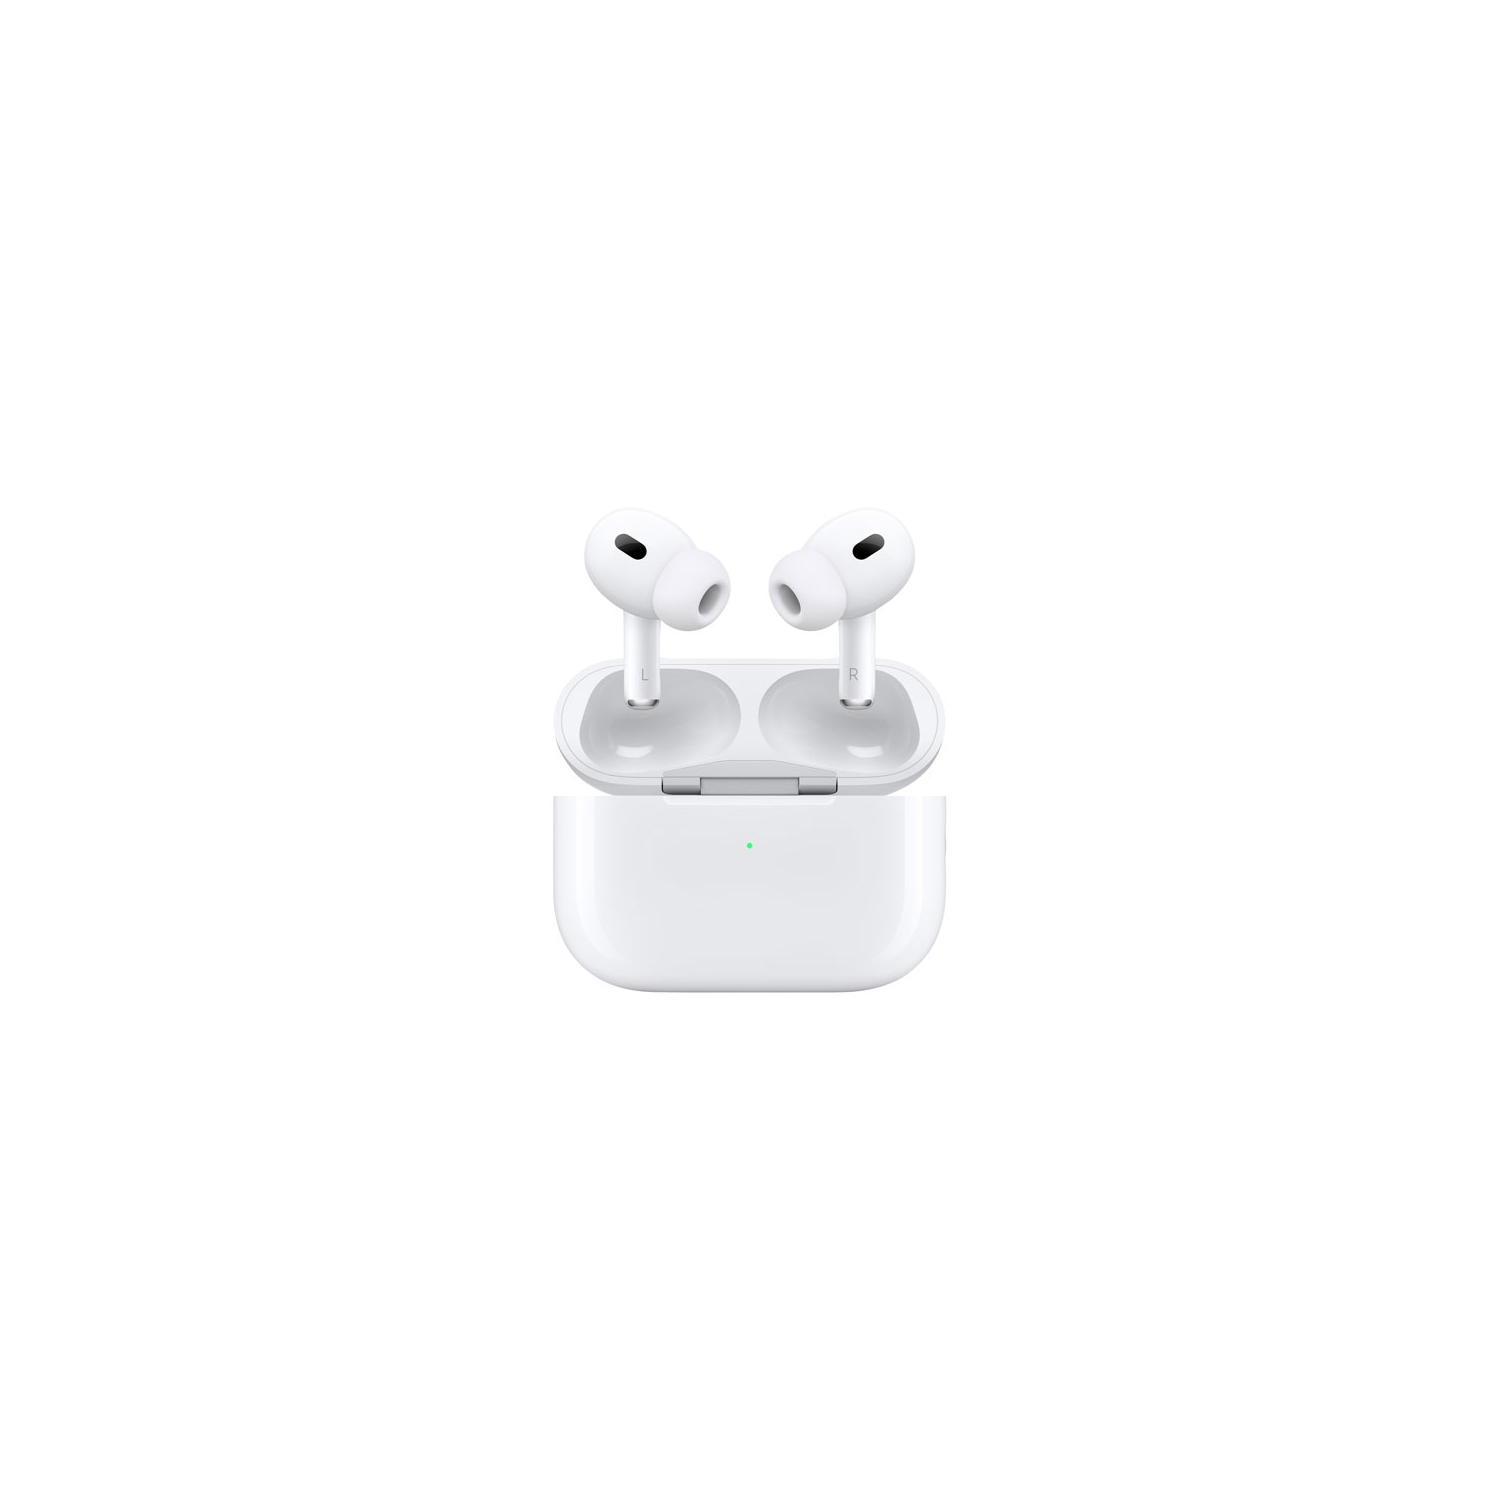 Refurbished (Good) - Apple AirPods Pro (2nd generation) In-Ear Noise Cancelling True Wireless Earbuds - White